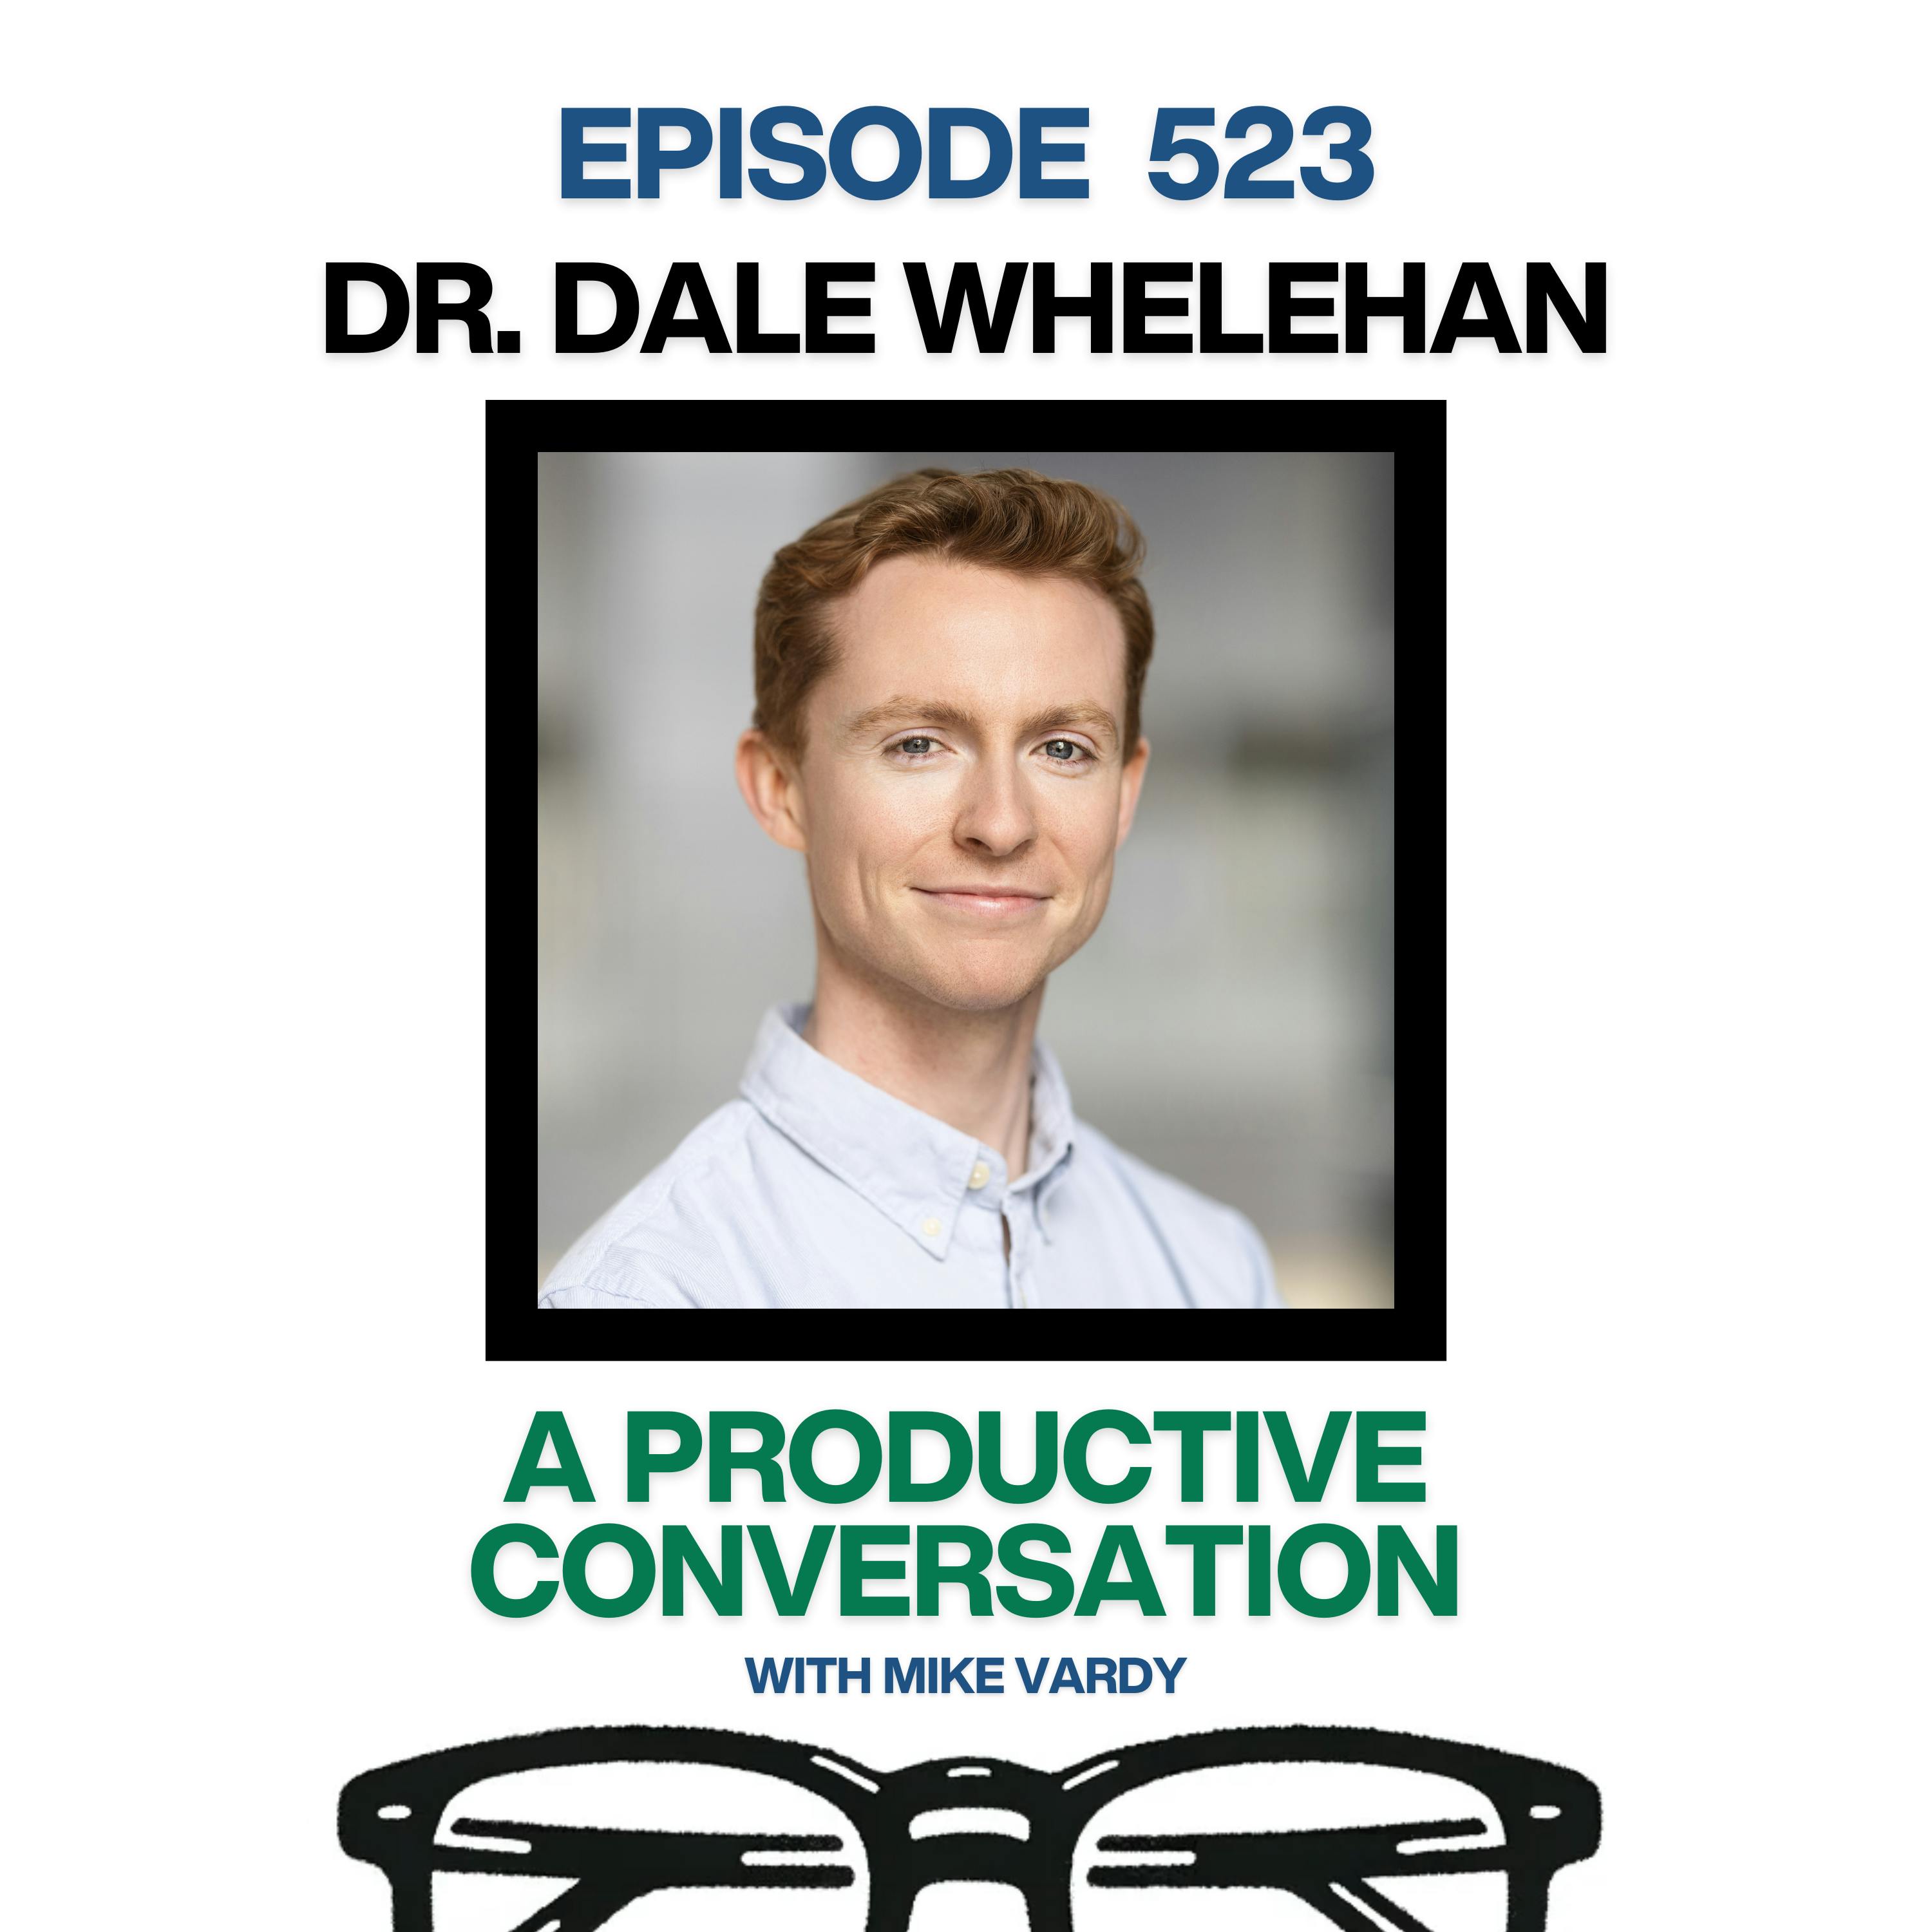 Dr. Dale Whelehan Talks About Revolutionizing Work with a Four-Day Week